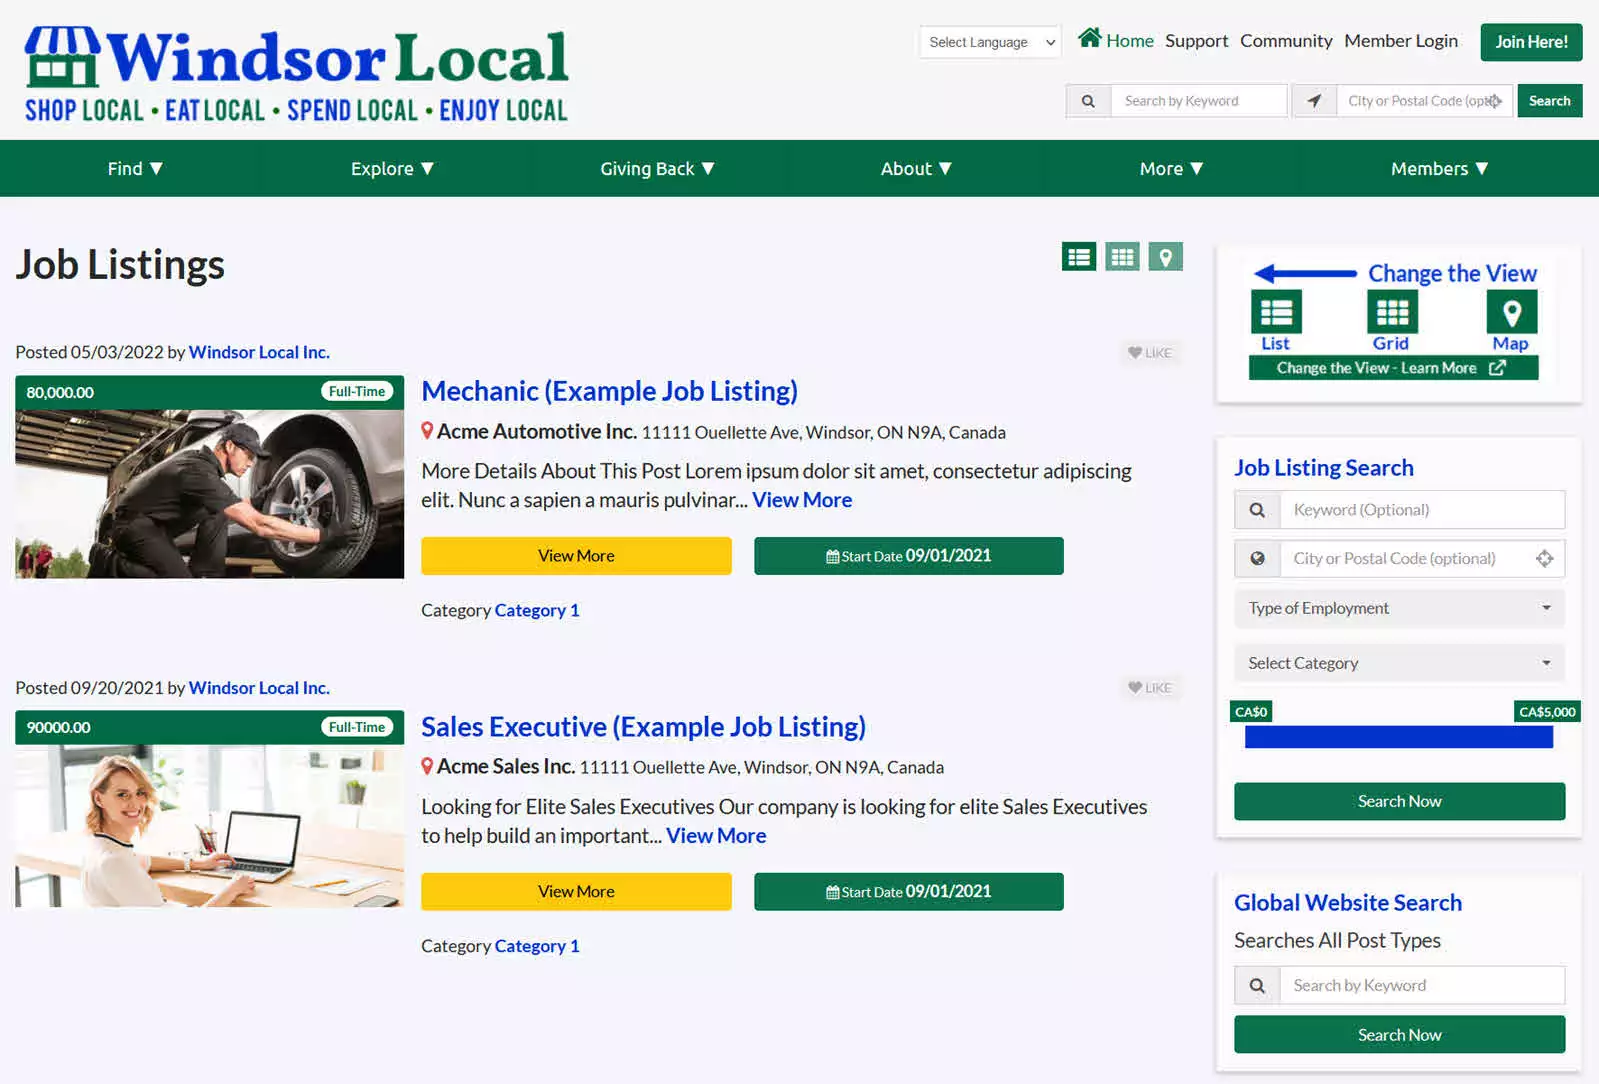 Windsor Local Job Listing Search Summary Results view